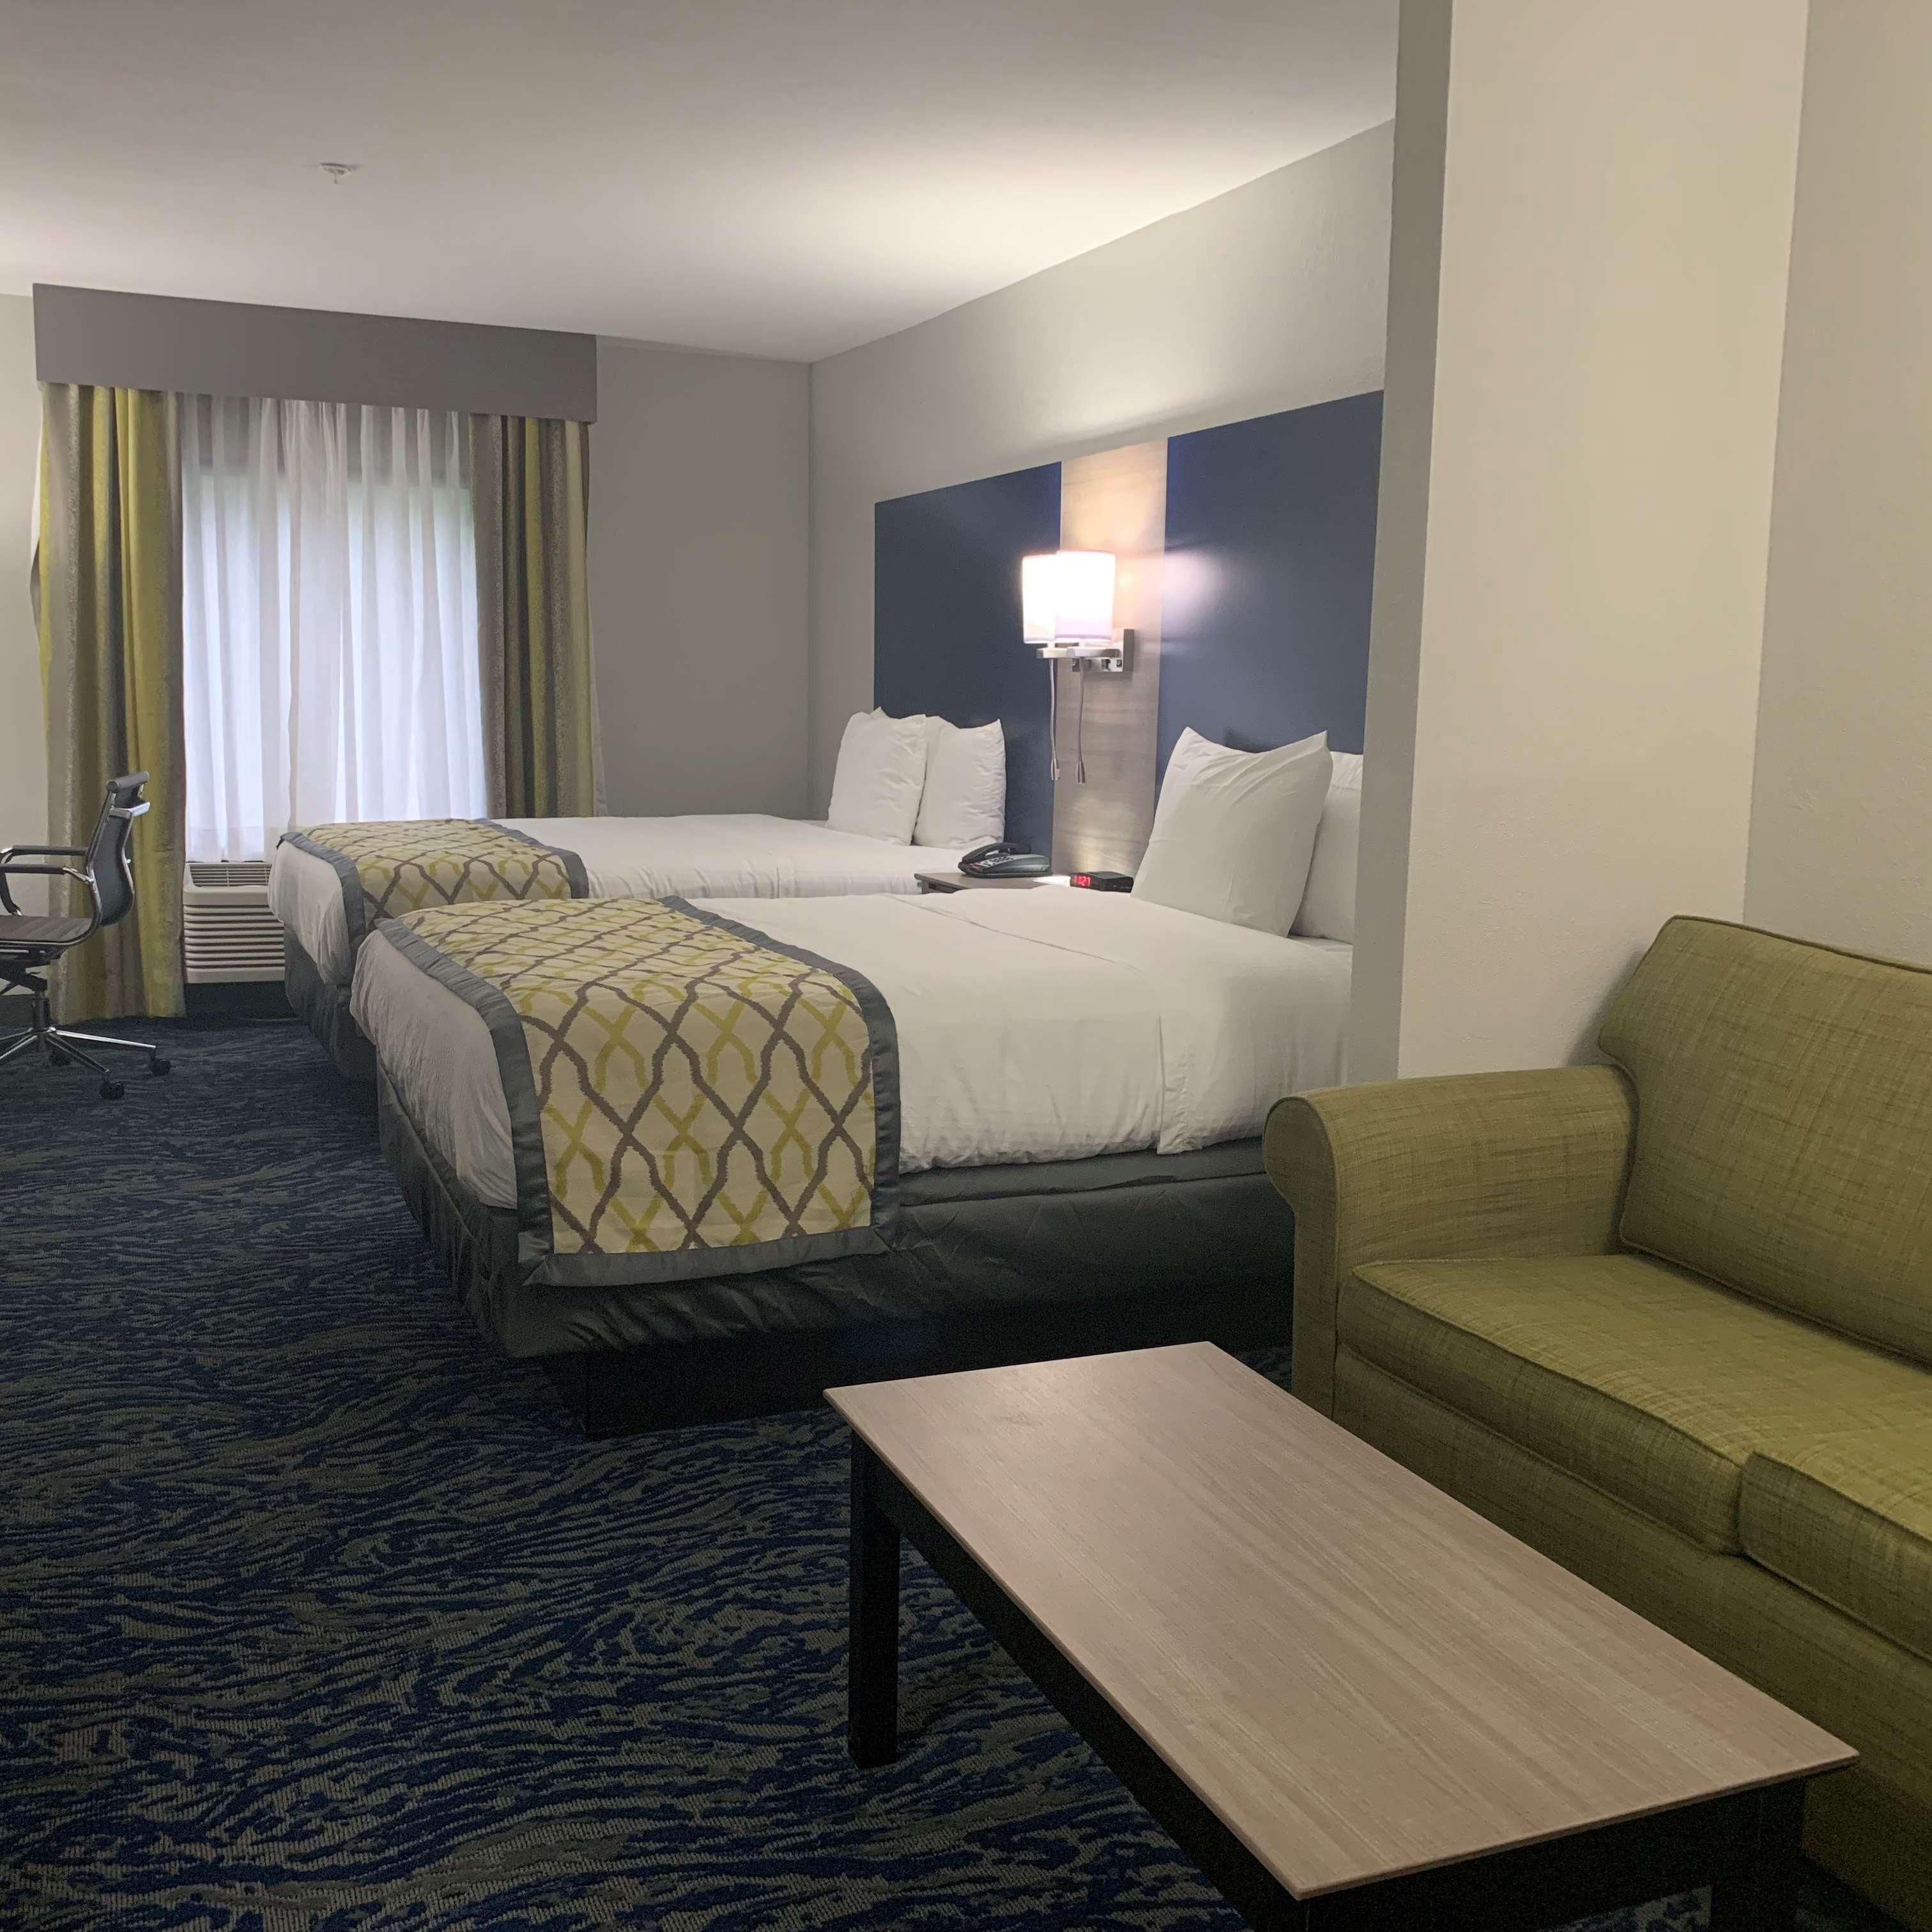 Best Western Knoxville Airport / Alcoa, Tn Room photo